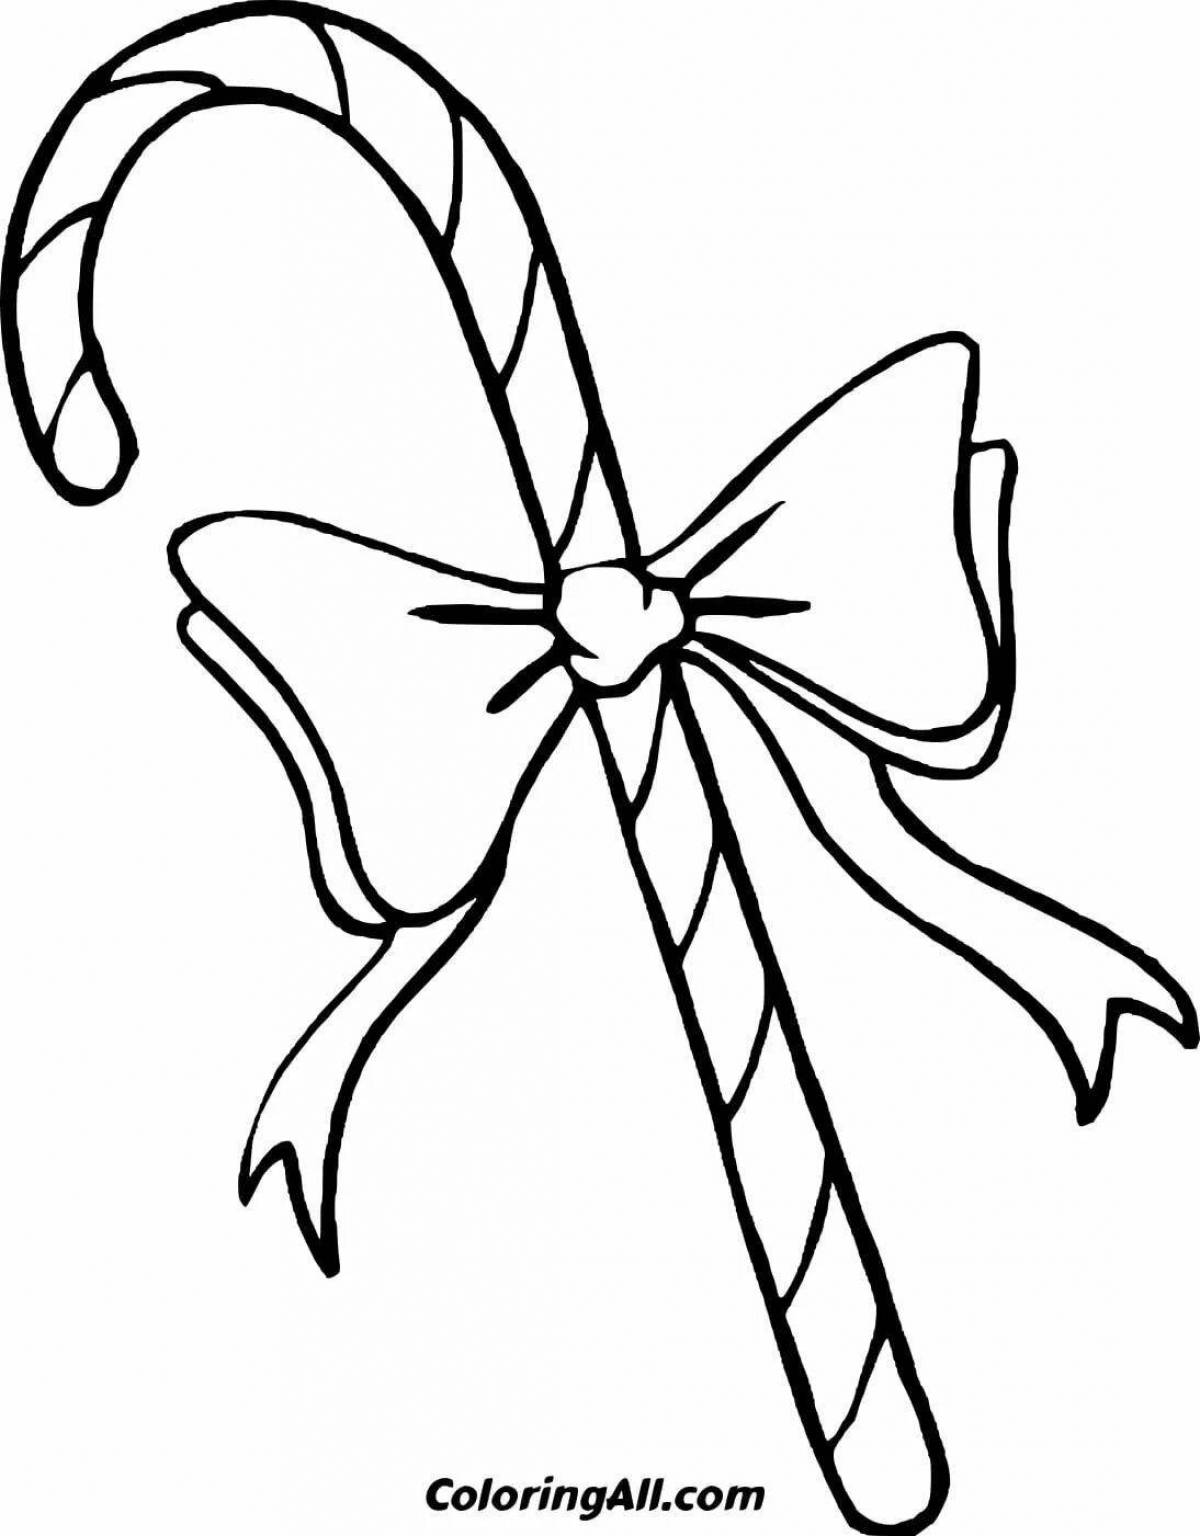 Coloring page bow for kids